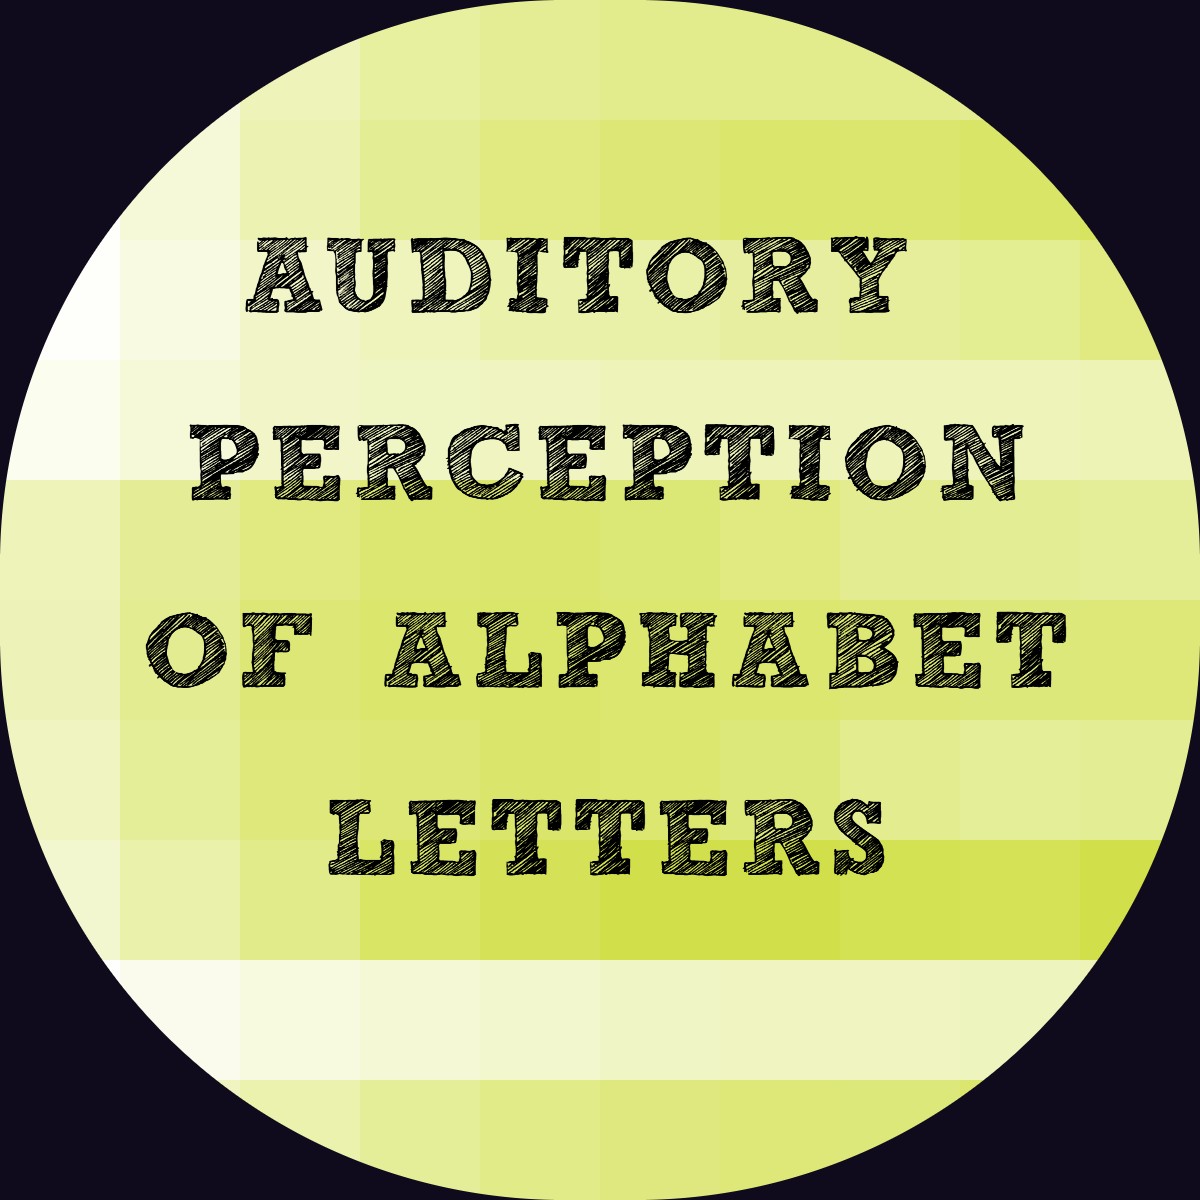 Auditory Perception of Alphabet Letters...